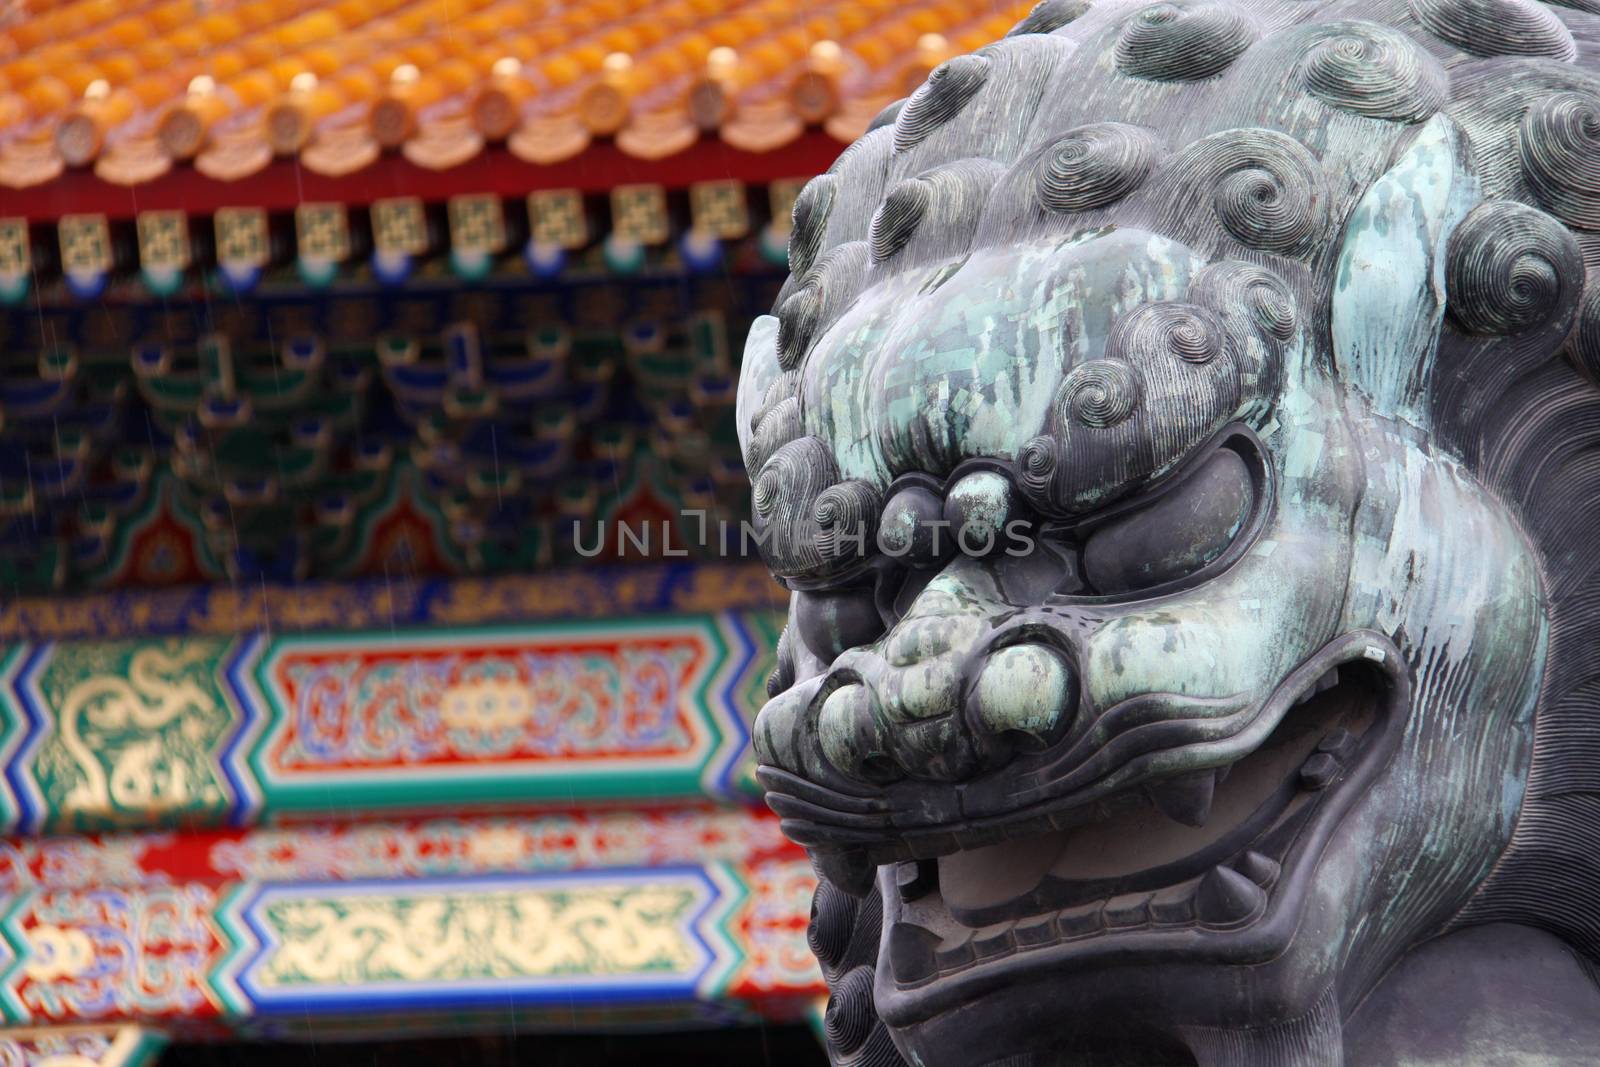 Lion made from copper taken infront of the Forbidden City in Beijing, China (it's a bit wet from the rain)